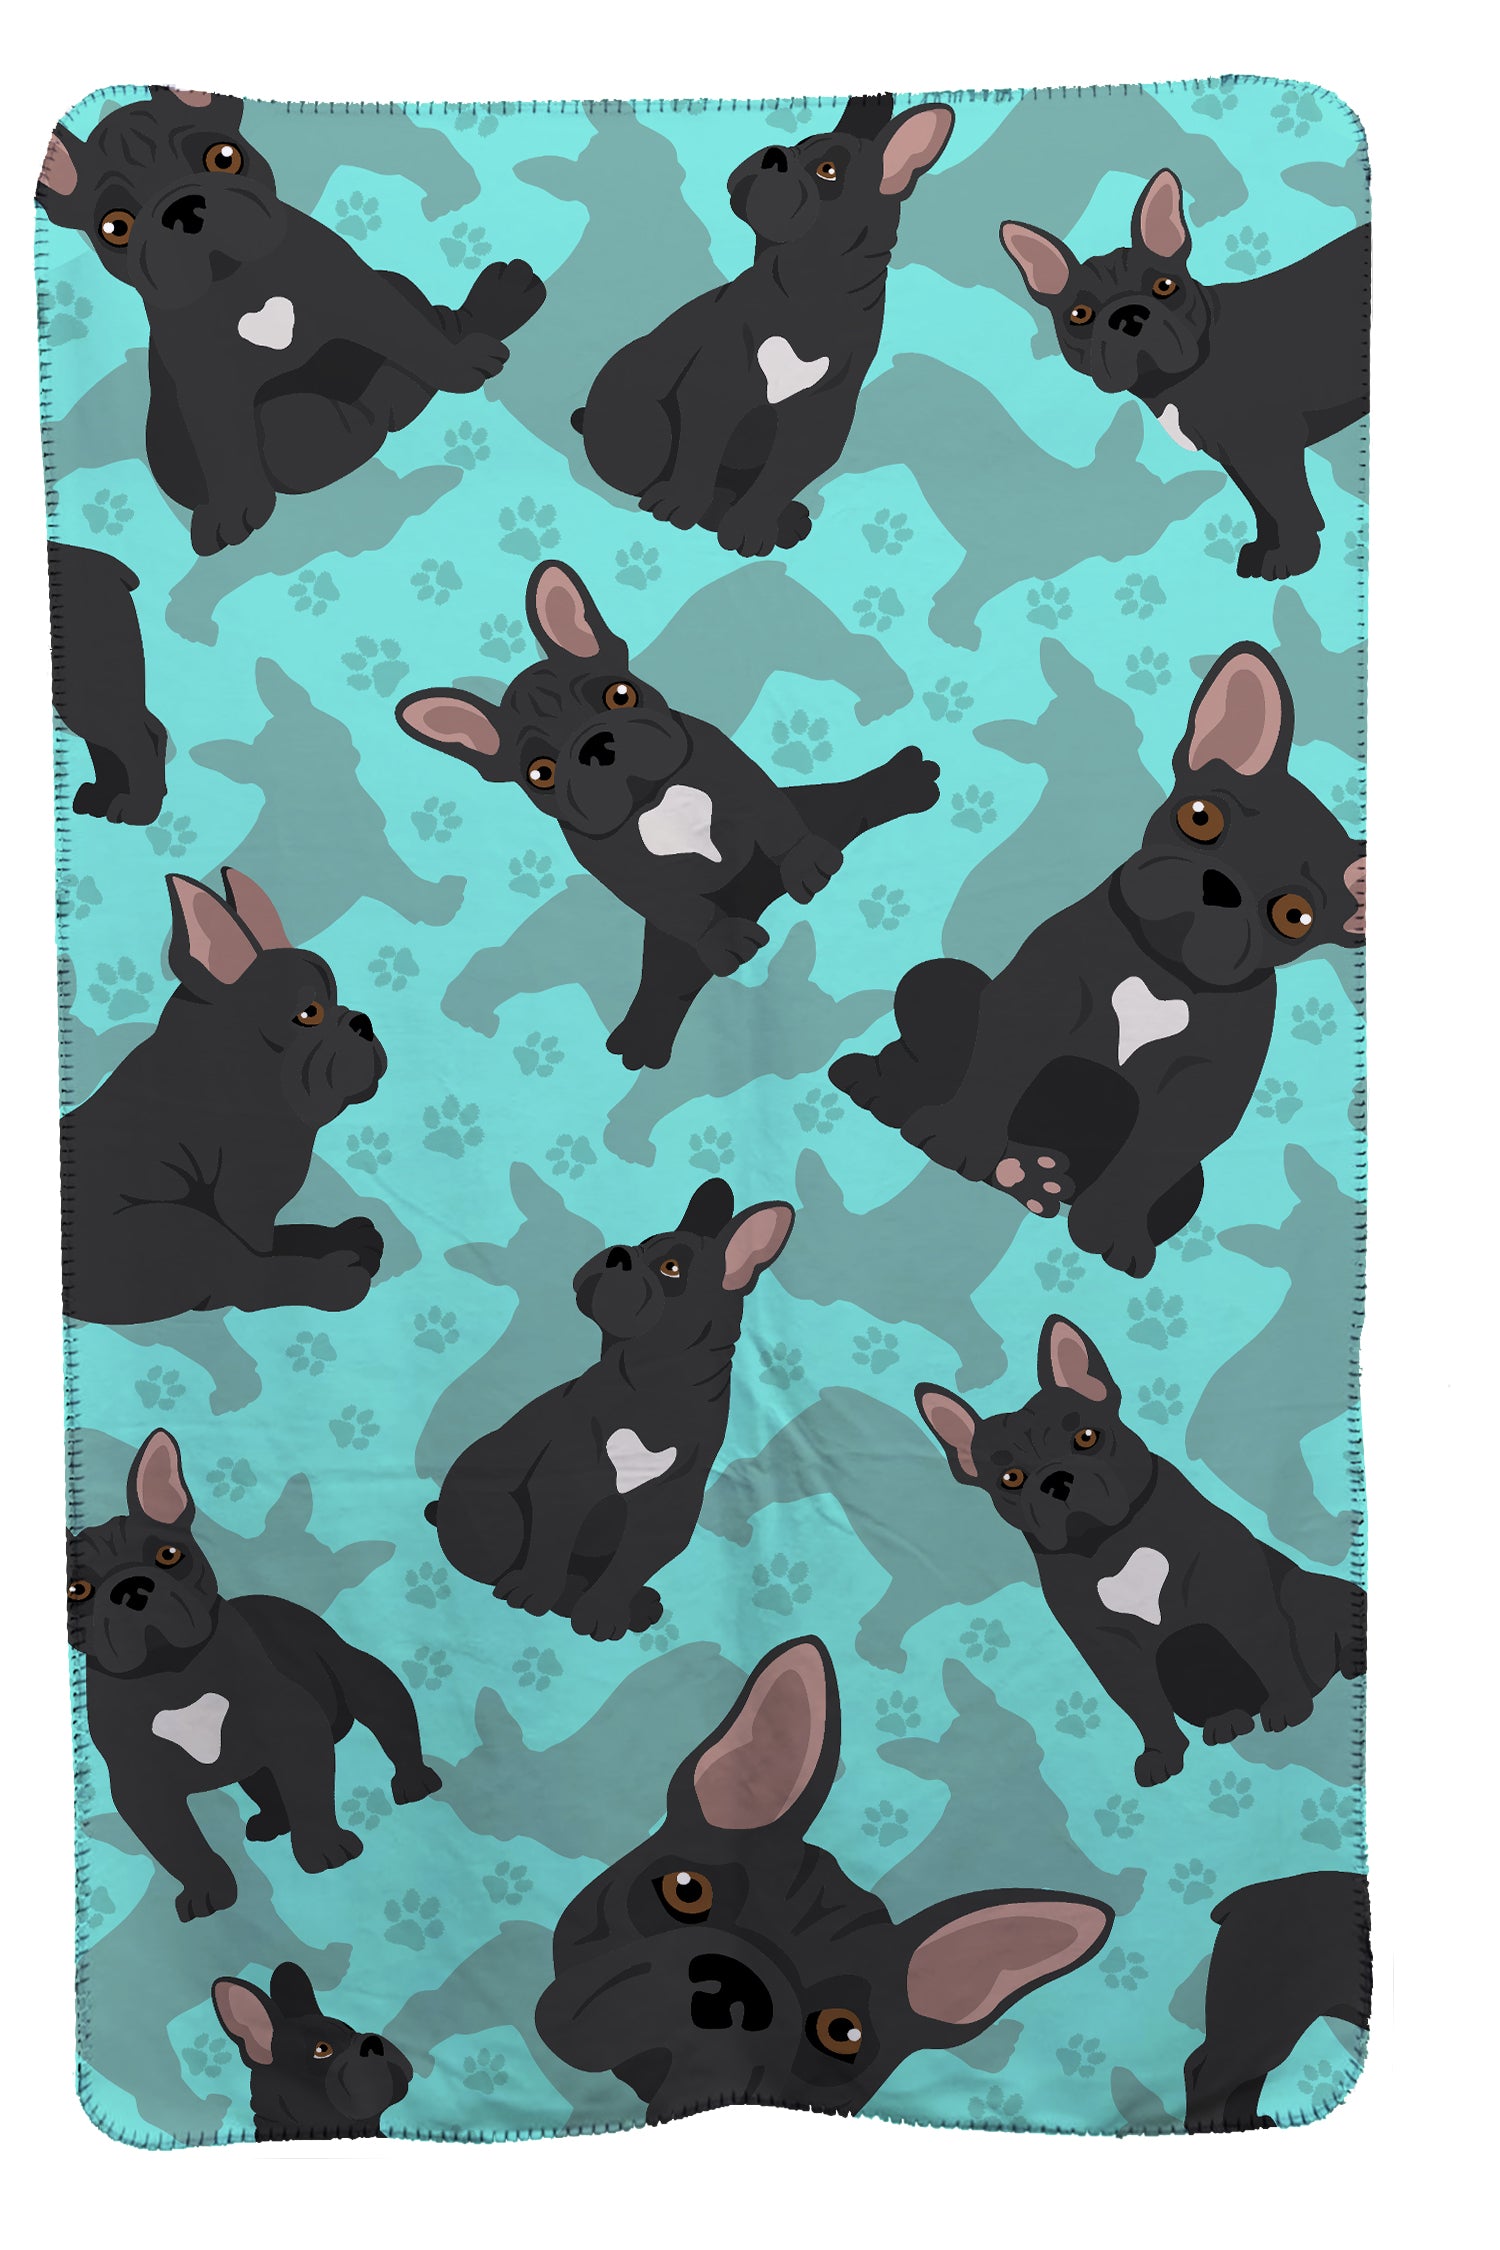 Buy this Black French Bulldog Soft Travel Blanket with Bag